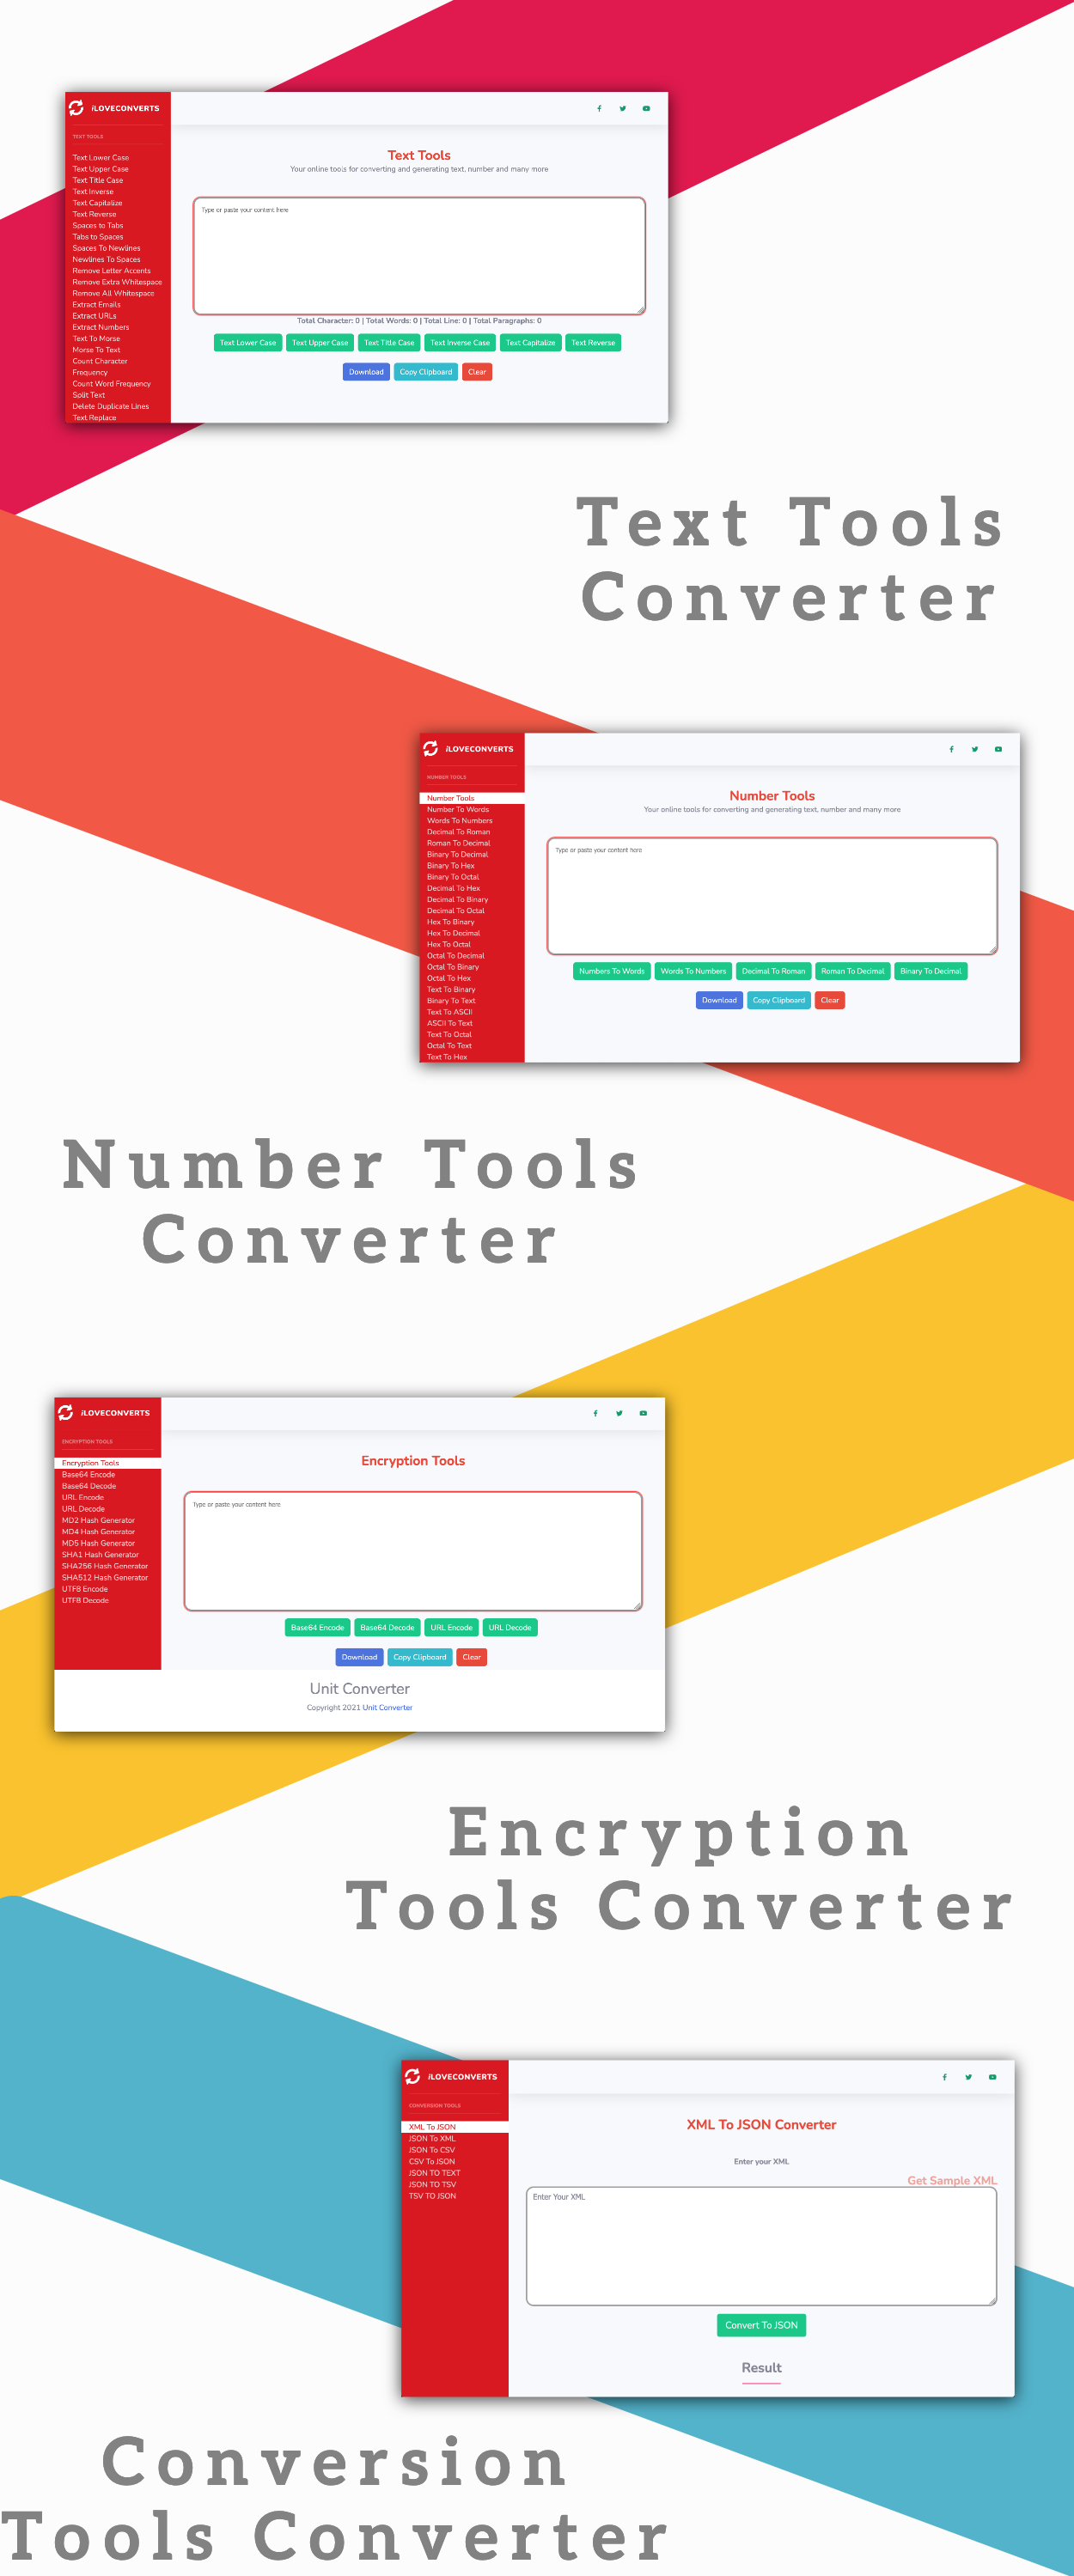 [All in One] iLoveConverts PRO - Online Converter Tools Full Production Ready App with Admin Panel - 8